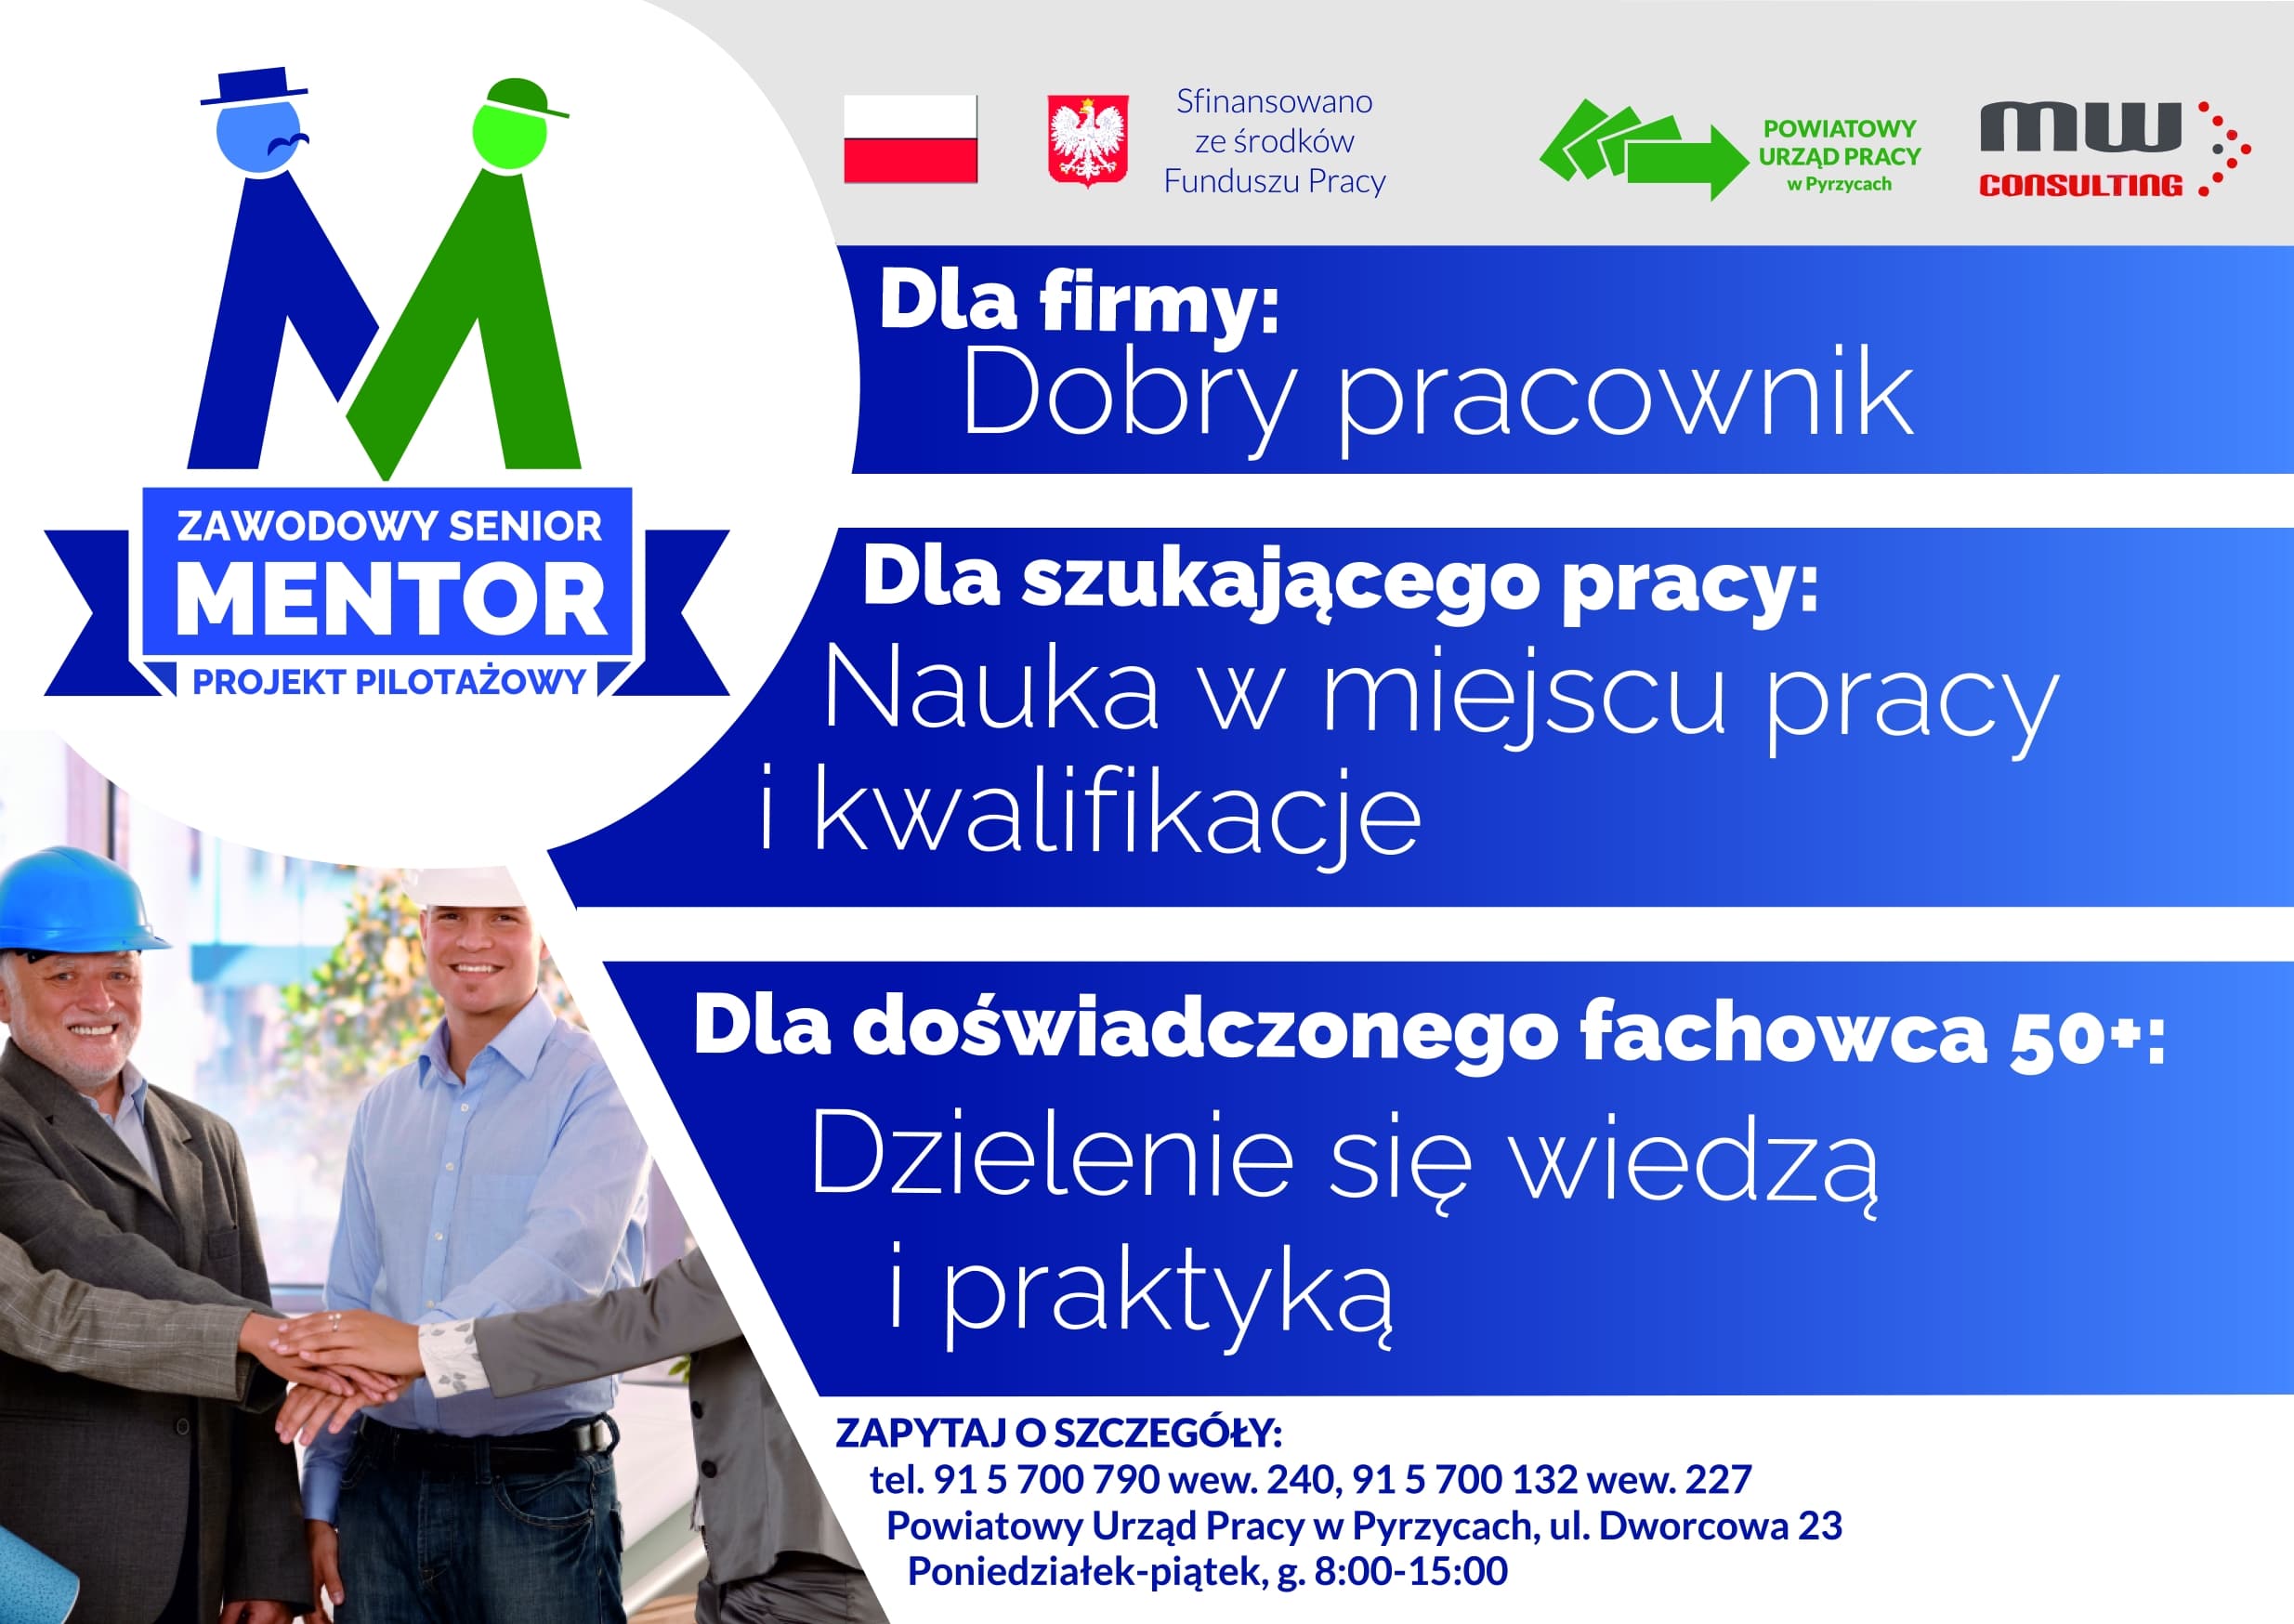 You are currently viewing Zawodowy senior MENTOR – projekt pilotażowy